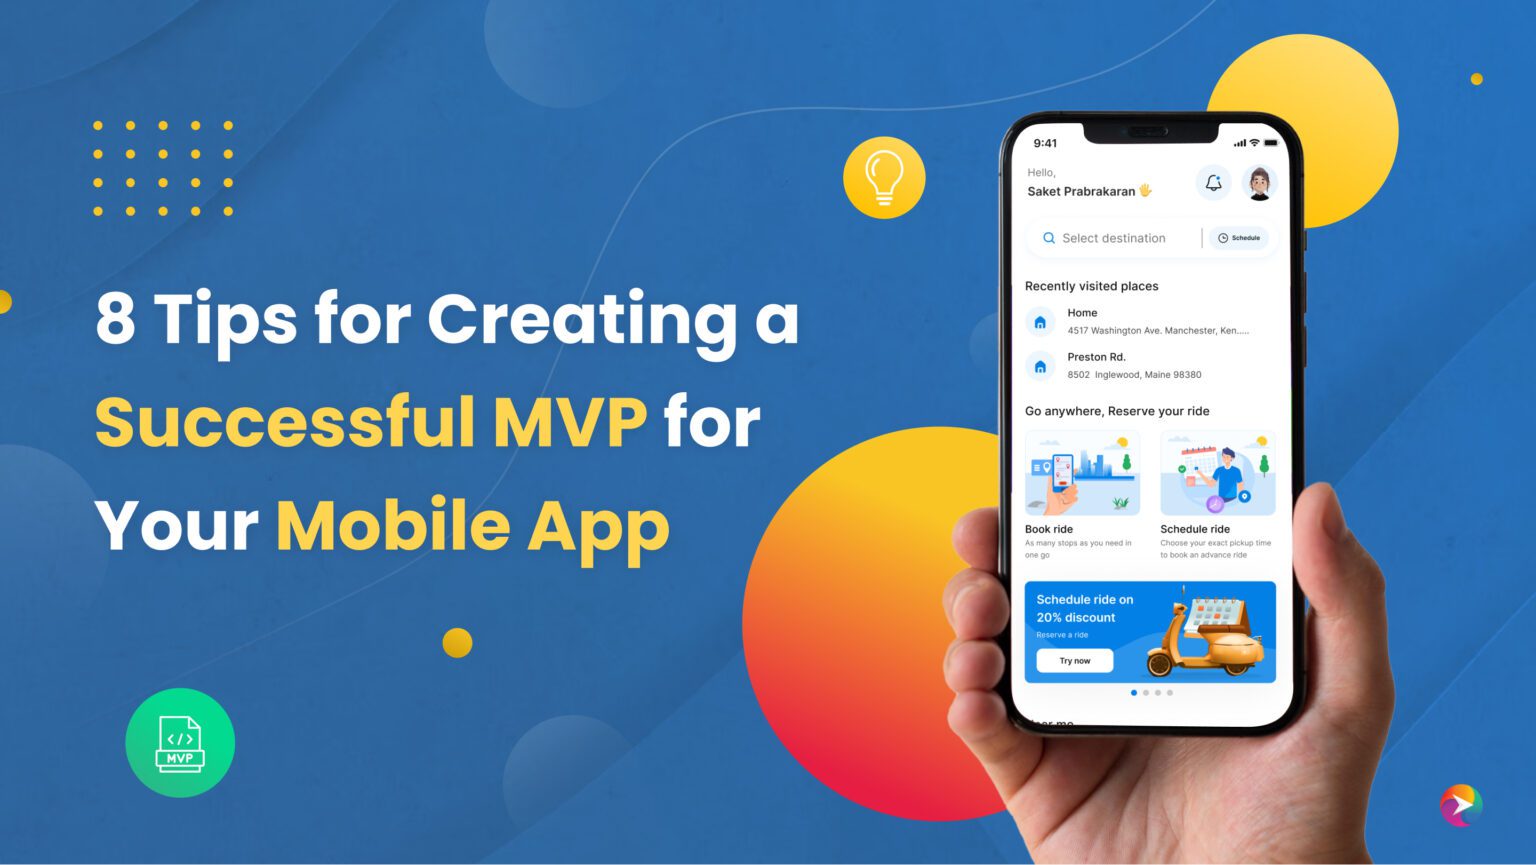 8 Tips for Creating a Successful MVP for Your Mobile App